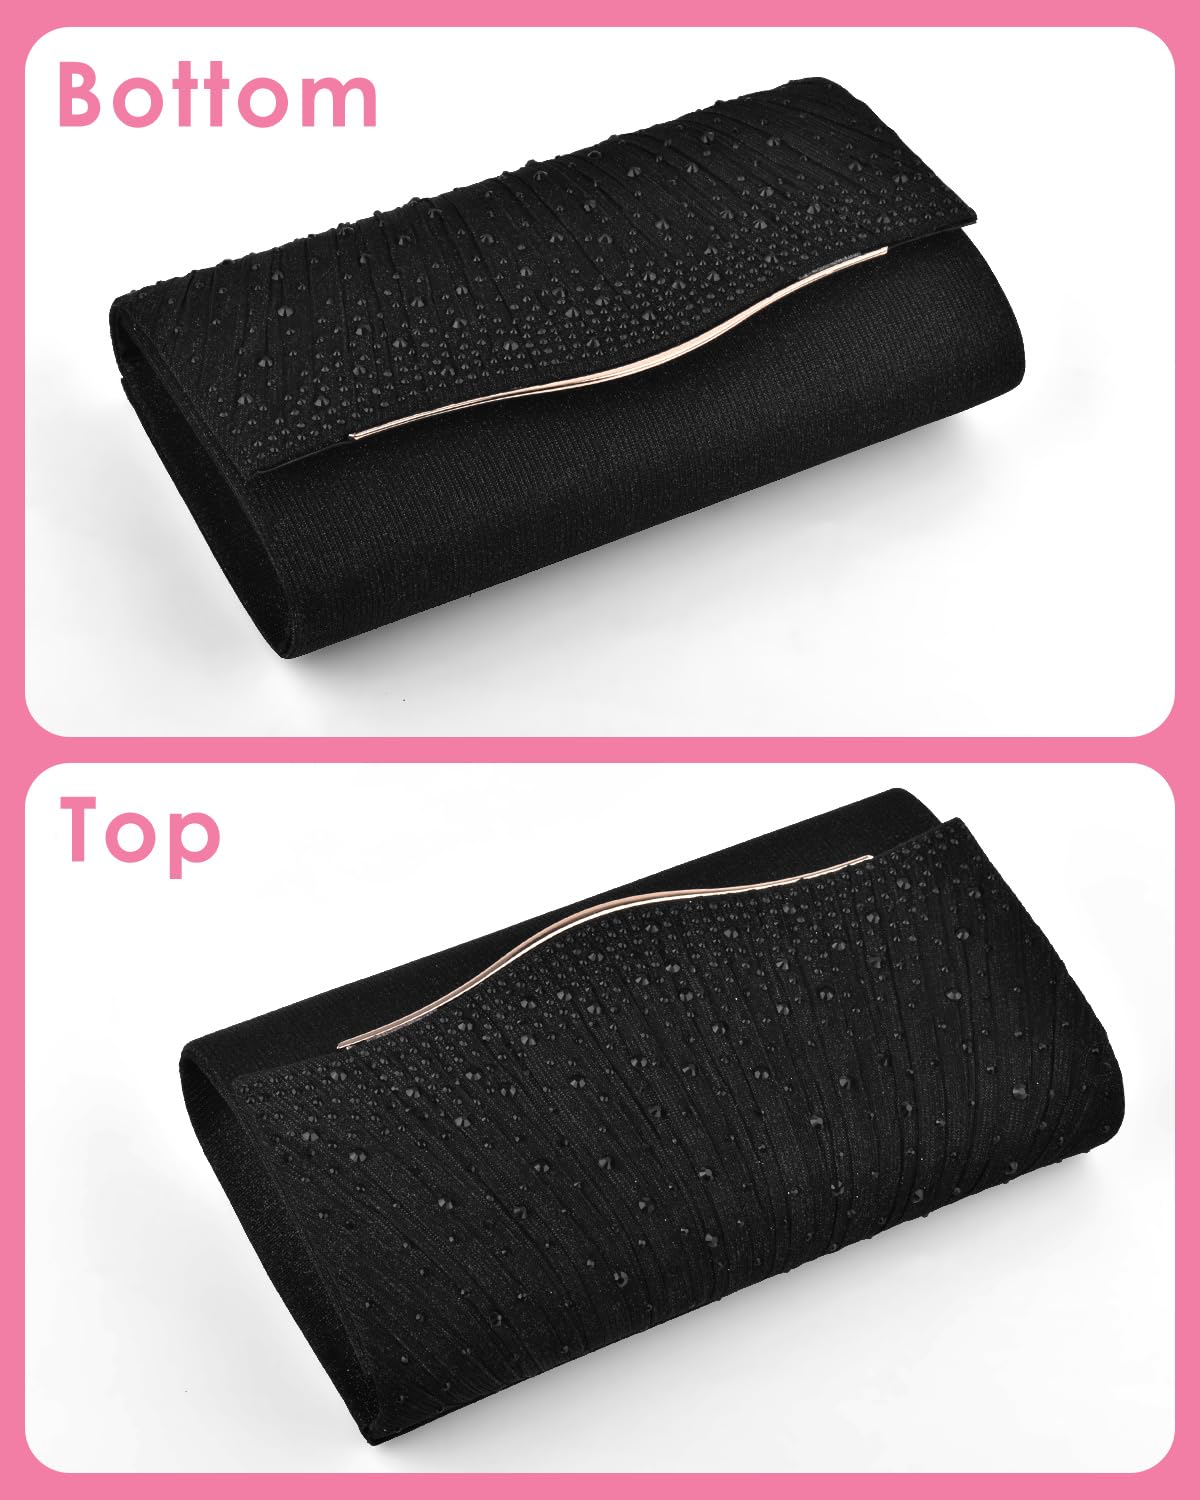 TINDTOP Clutch Purses for Women Evening, Formal Party Clutch Bags Sparkling Shoulder Envelope Handbags Cocktail Clutches